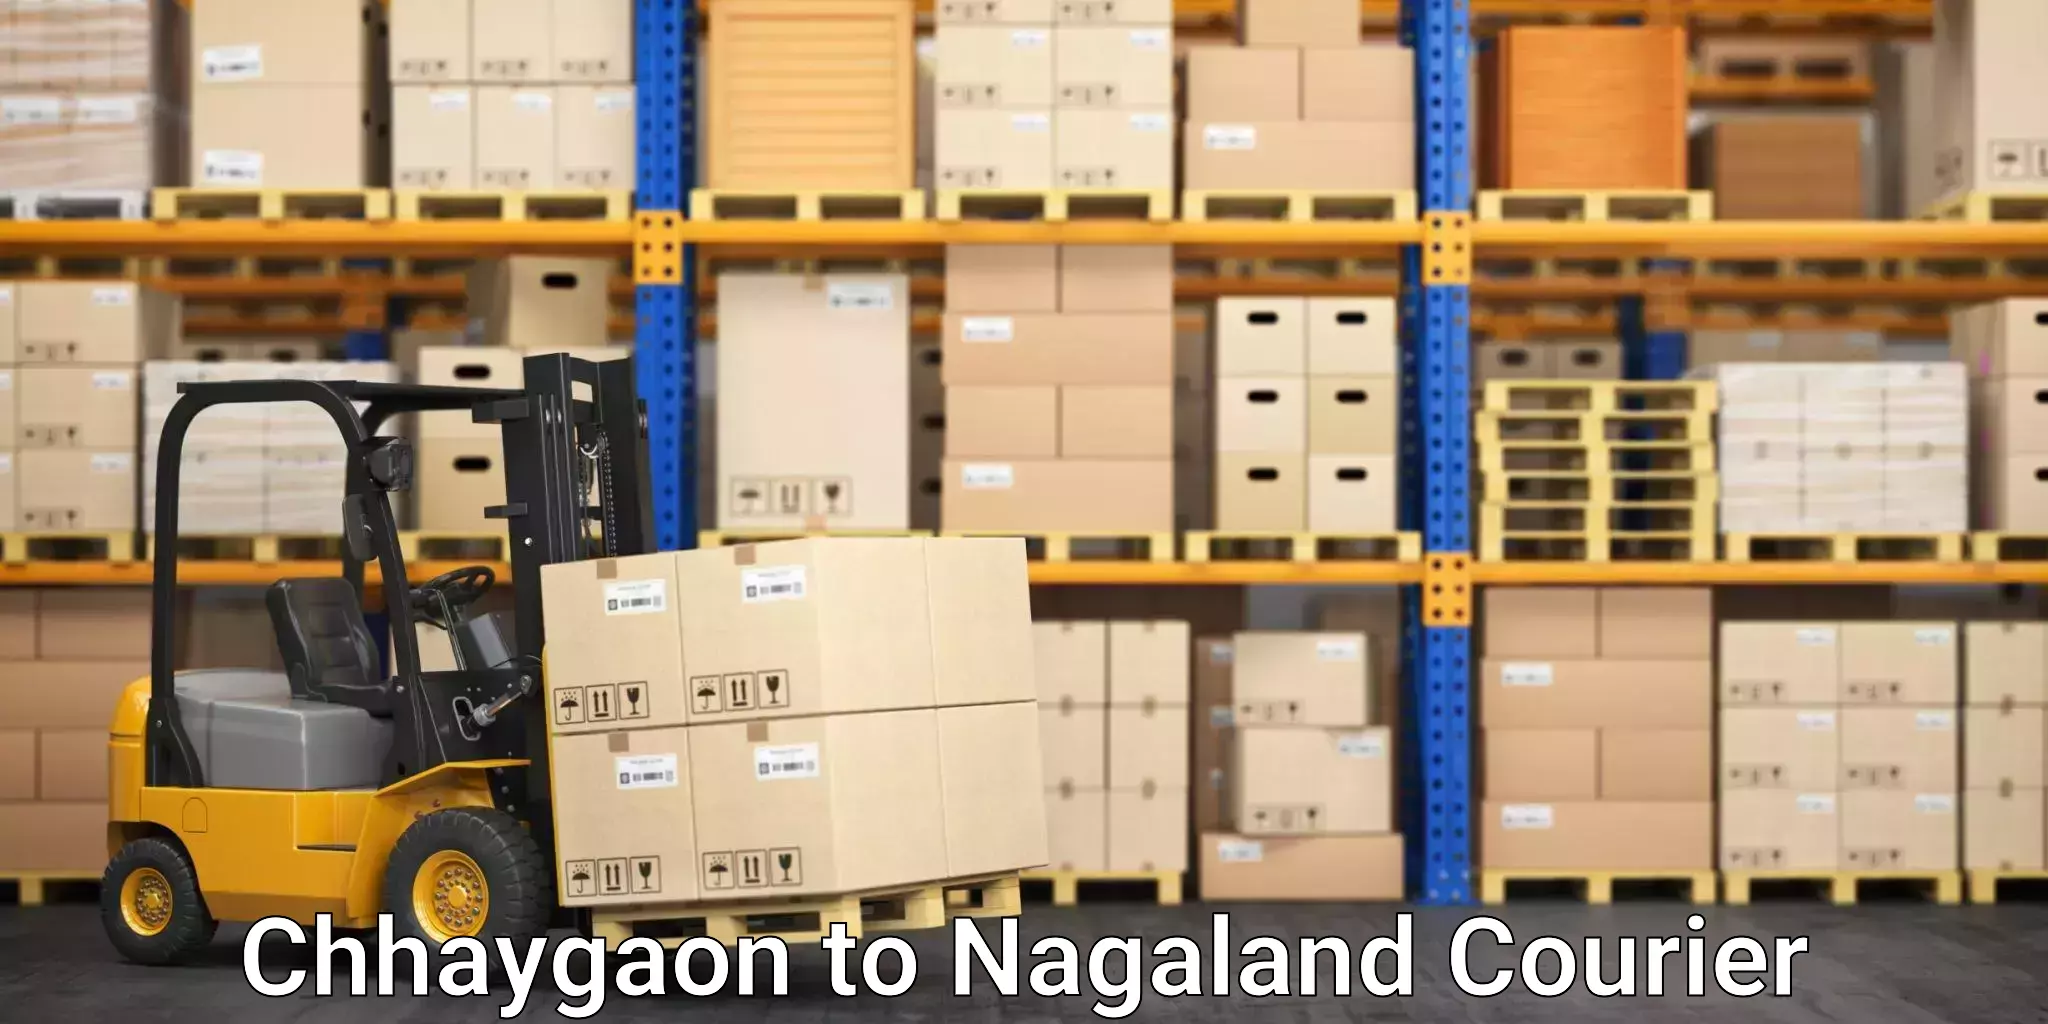 Nationwide shipping services Chhaygaon to Dimapur